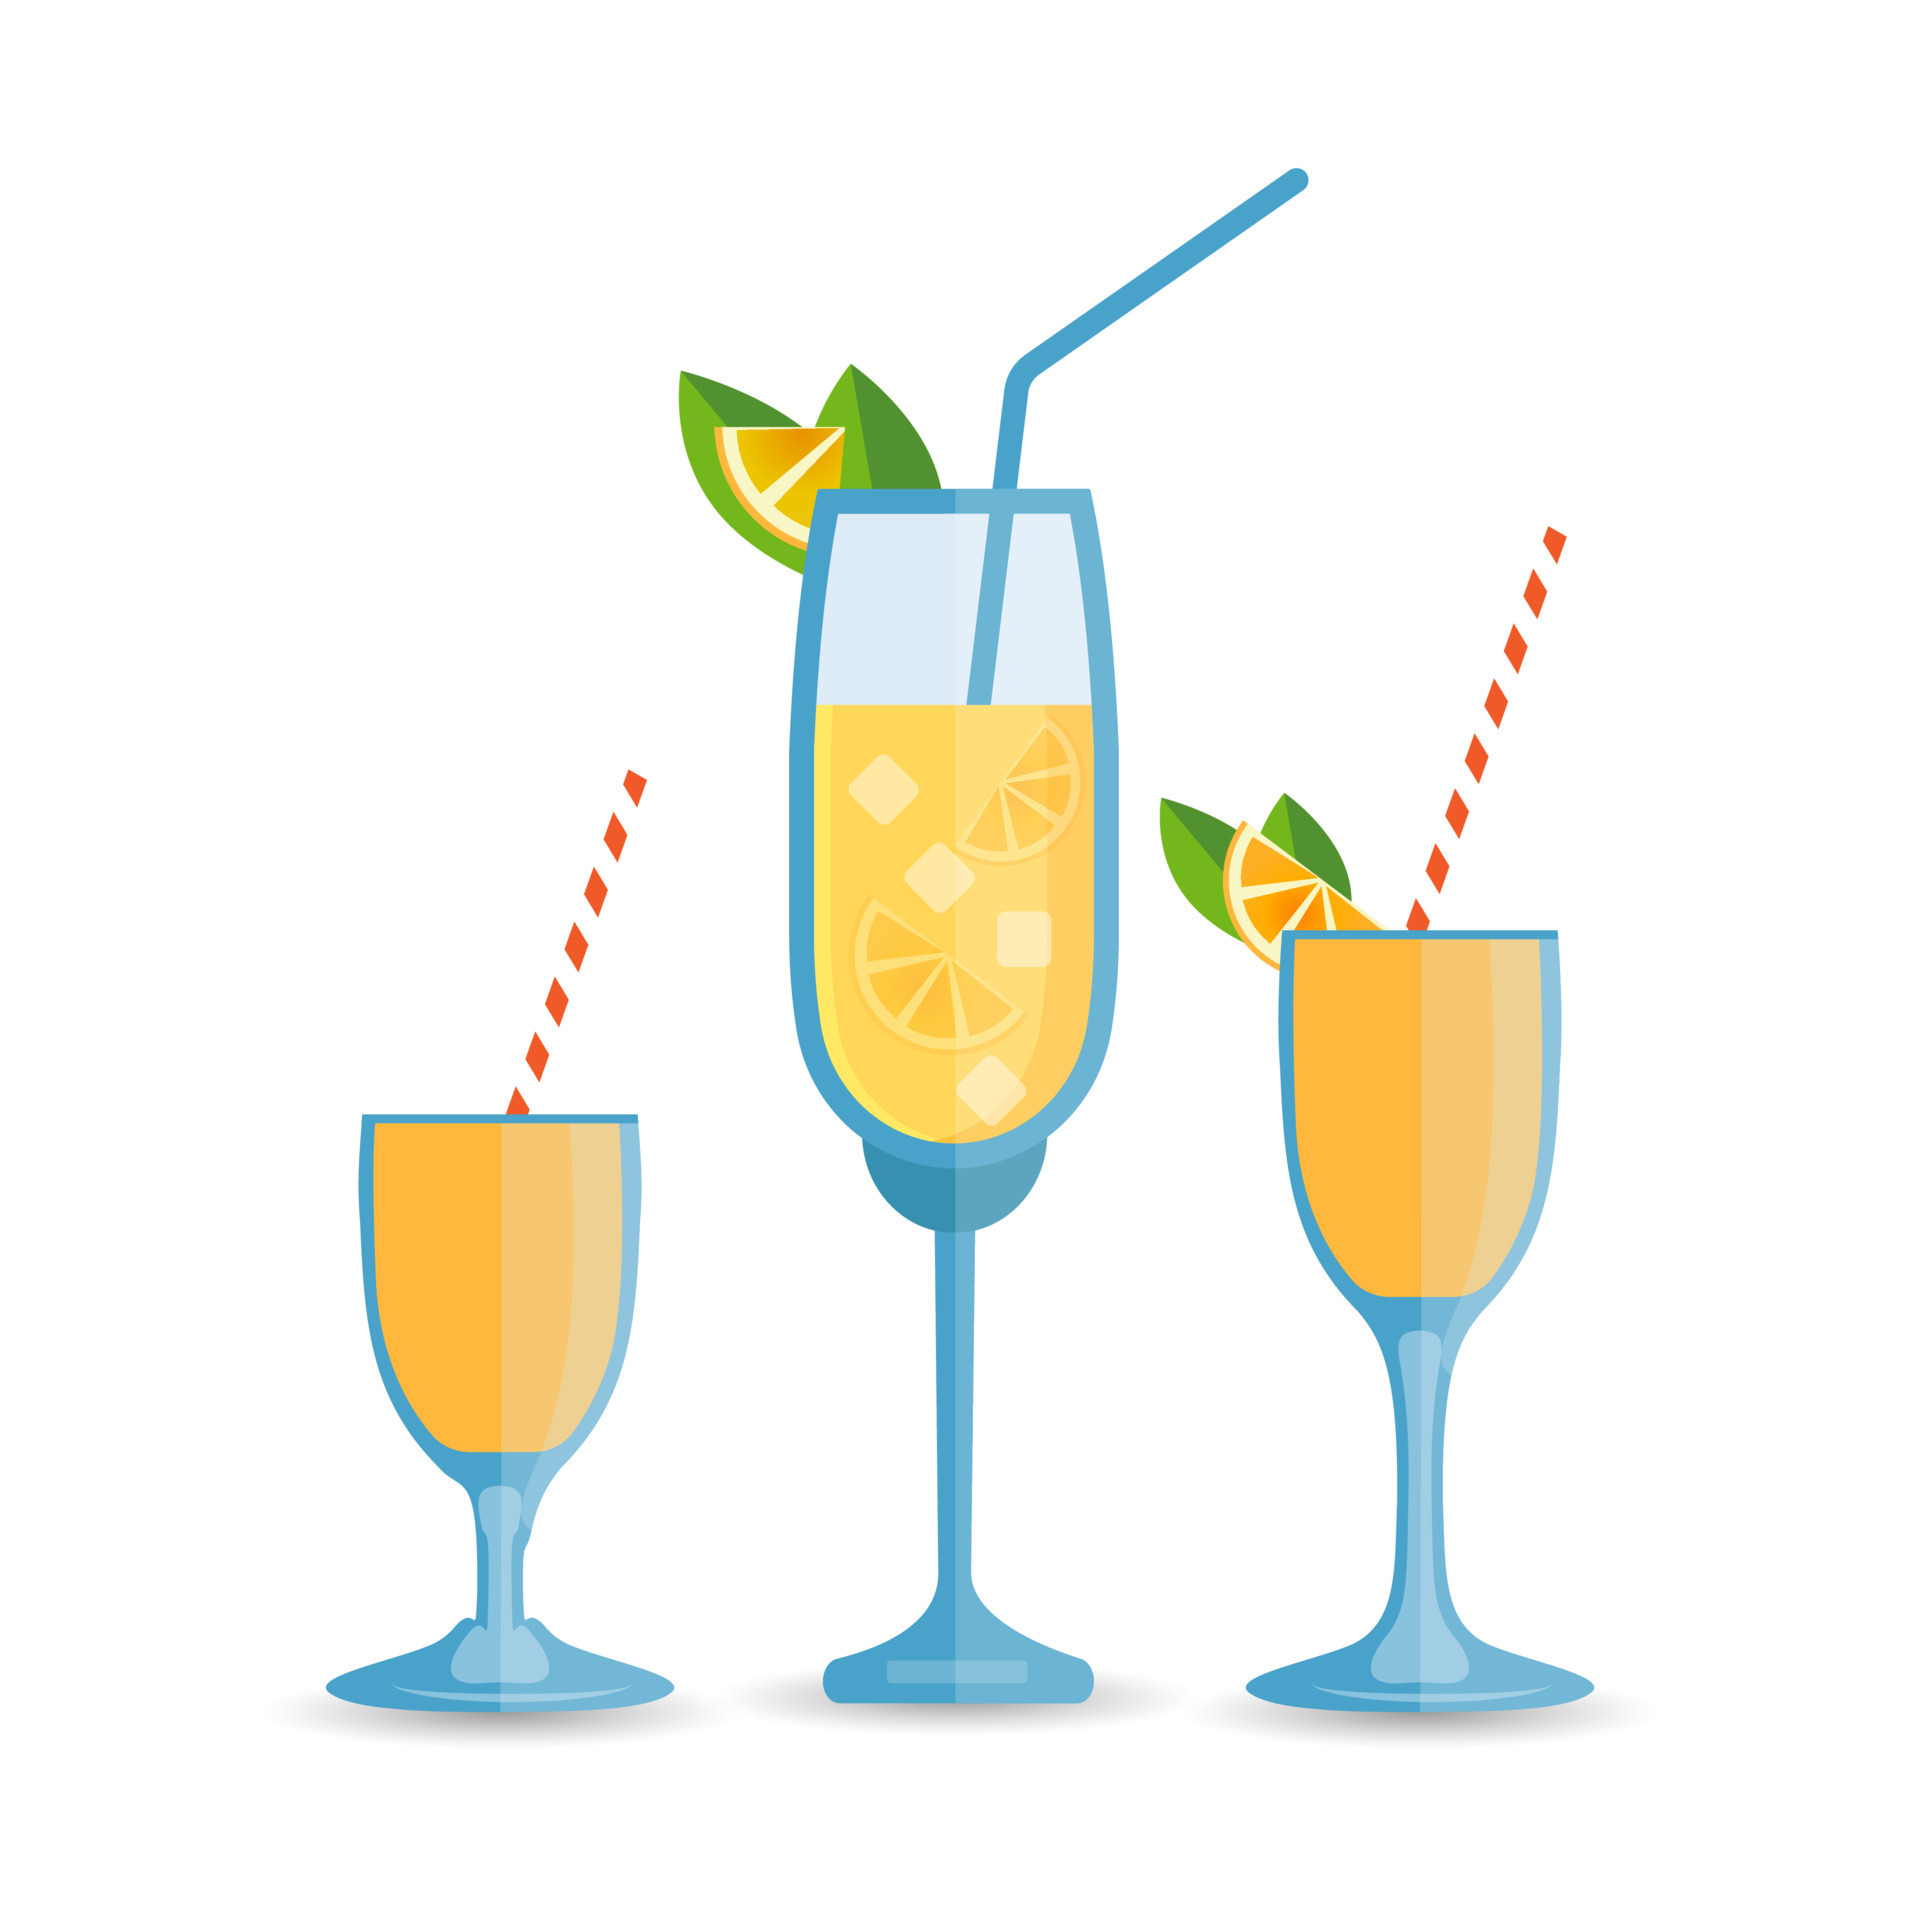 https://static.vecteezy.com/system/resources/previews/021/919/721/original/mimosa-drink-illustrations-collections-design-glass-alcohol-juice-party-brunch-champagne-isolated-cafe-bar-ice-art-lemon-lime-mimosa-food-drawing-illustrations-free-vector.jpg